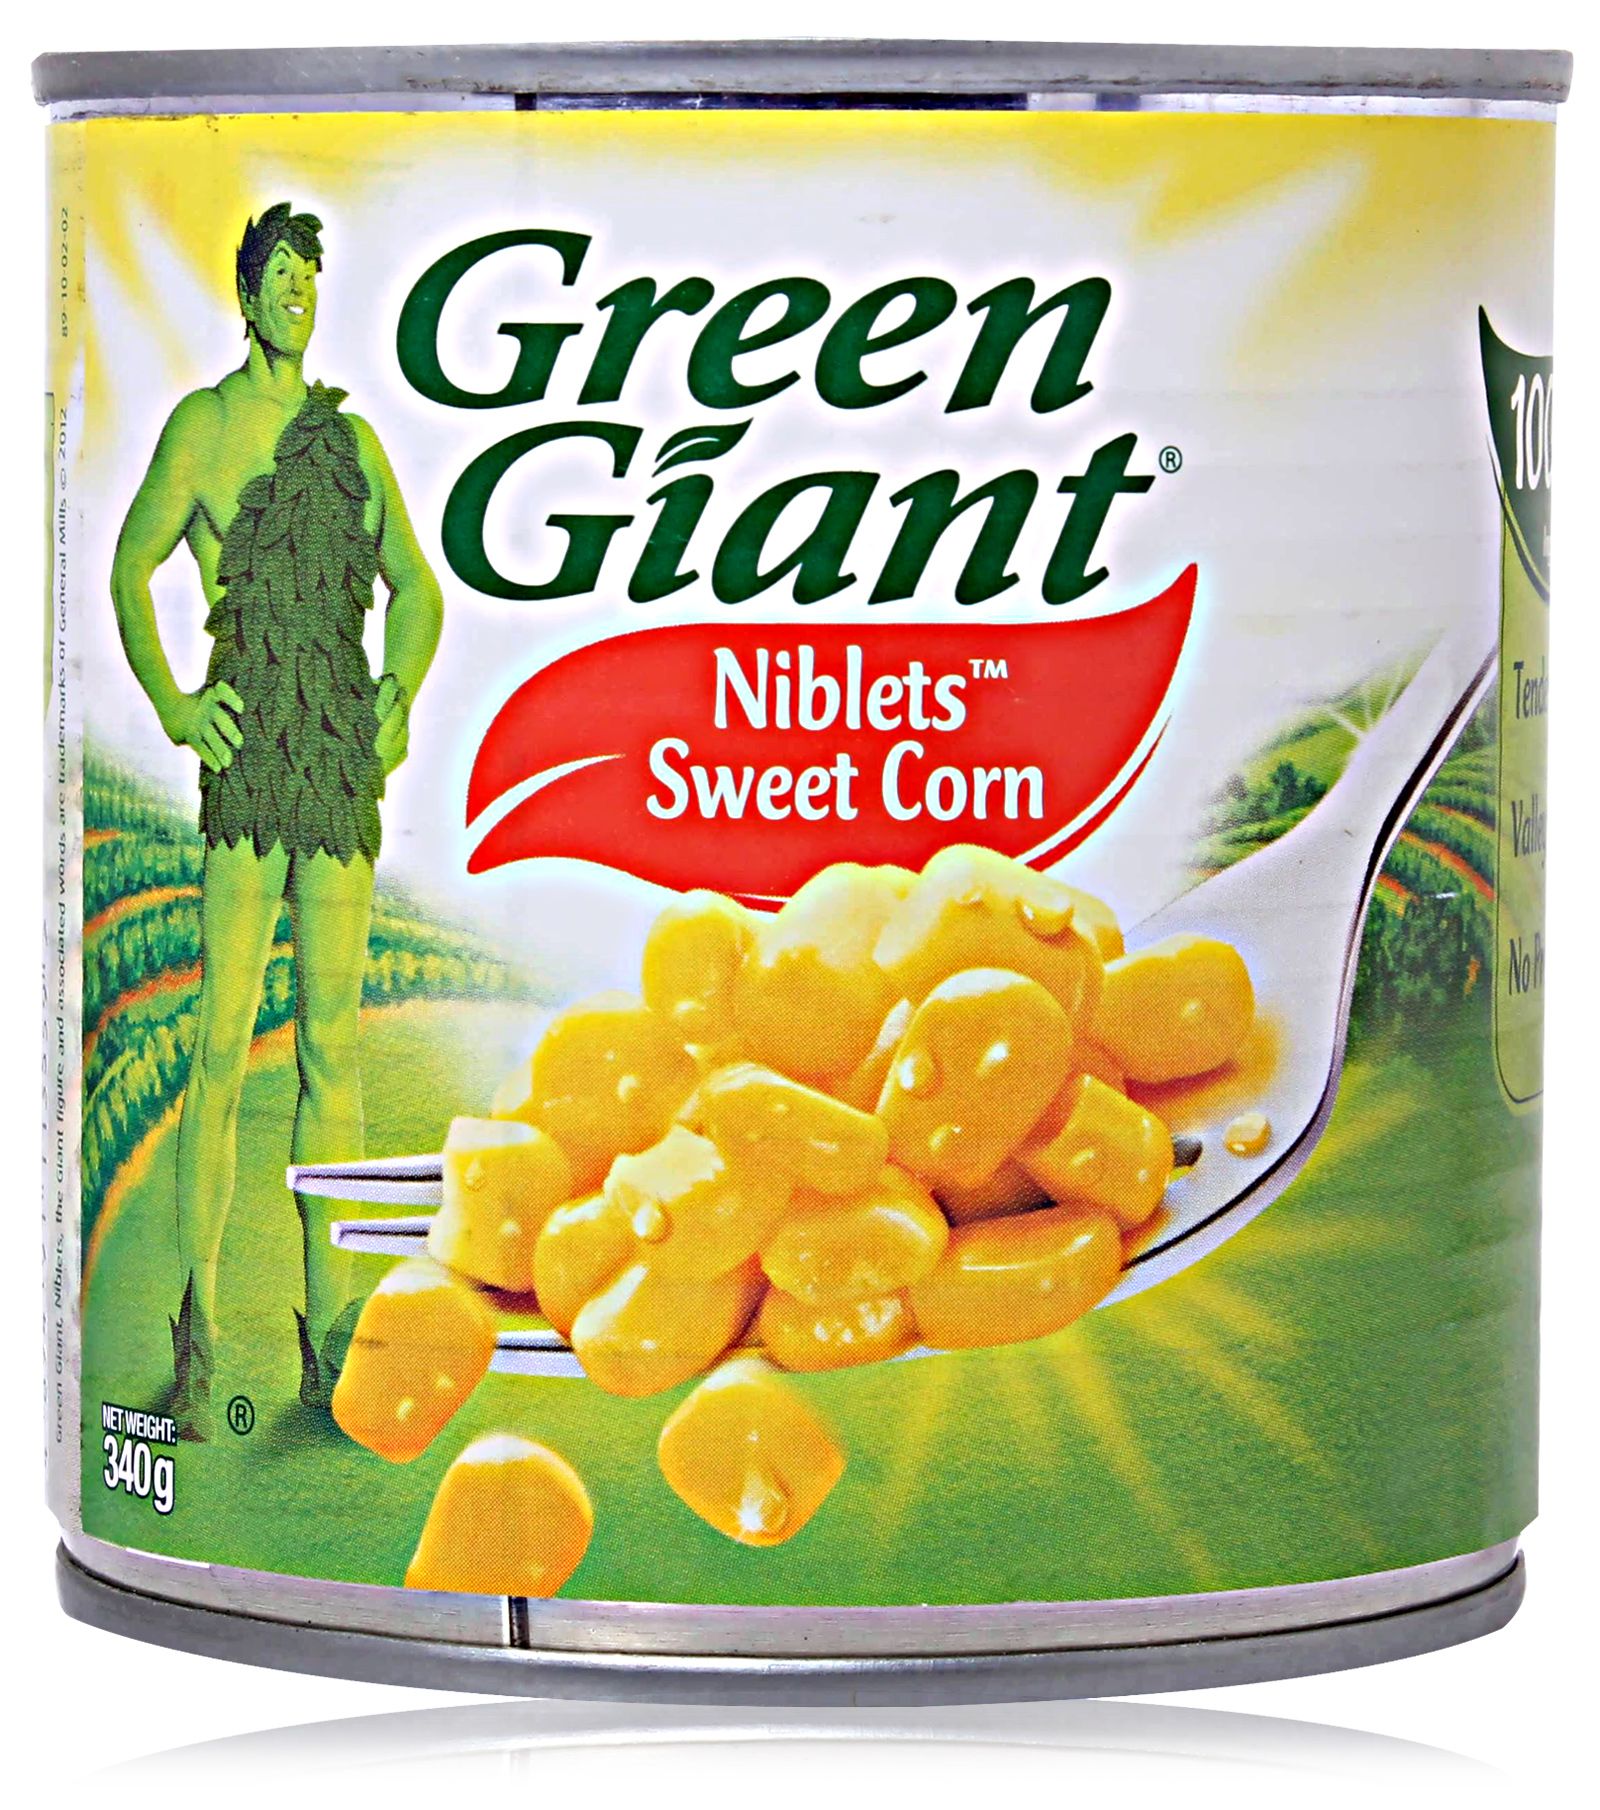 Green Giant corn | Favorite recipes, Green giant, Food